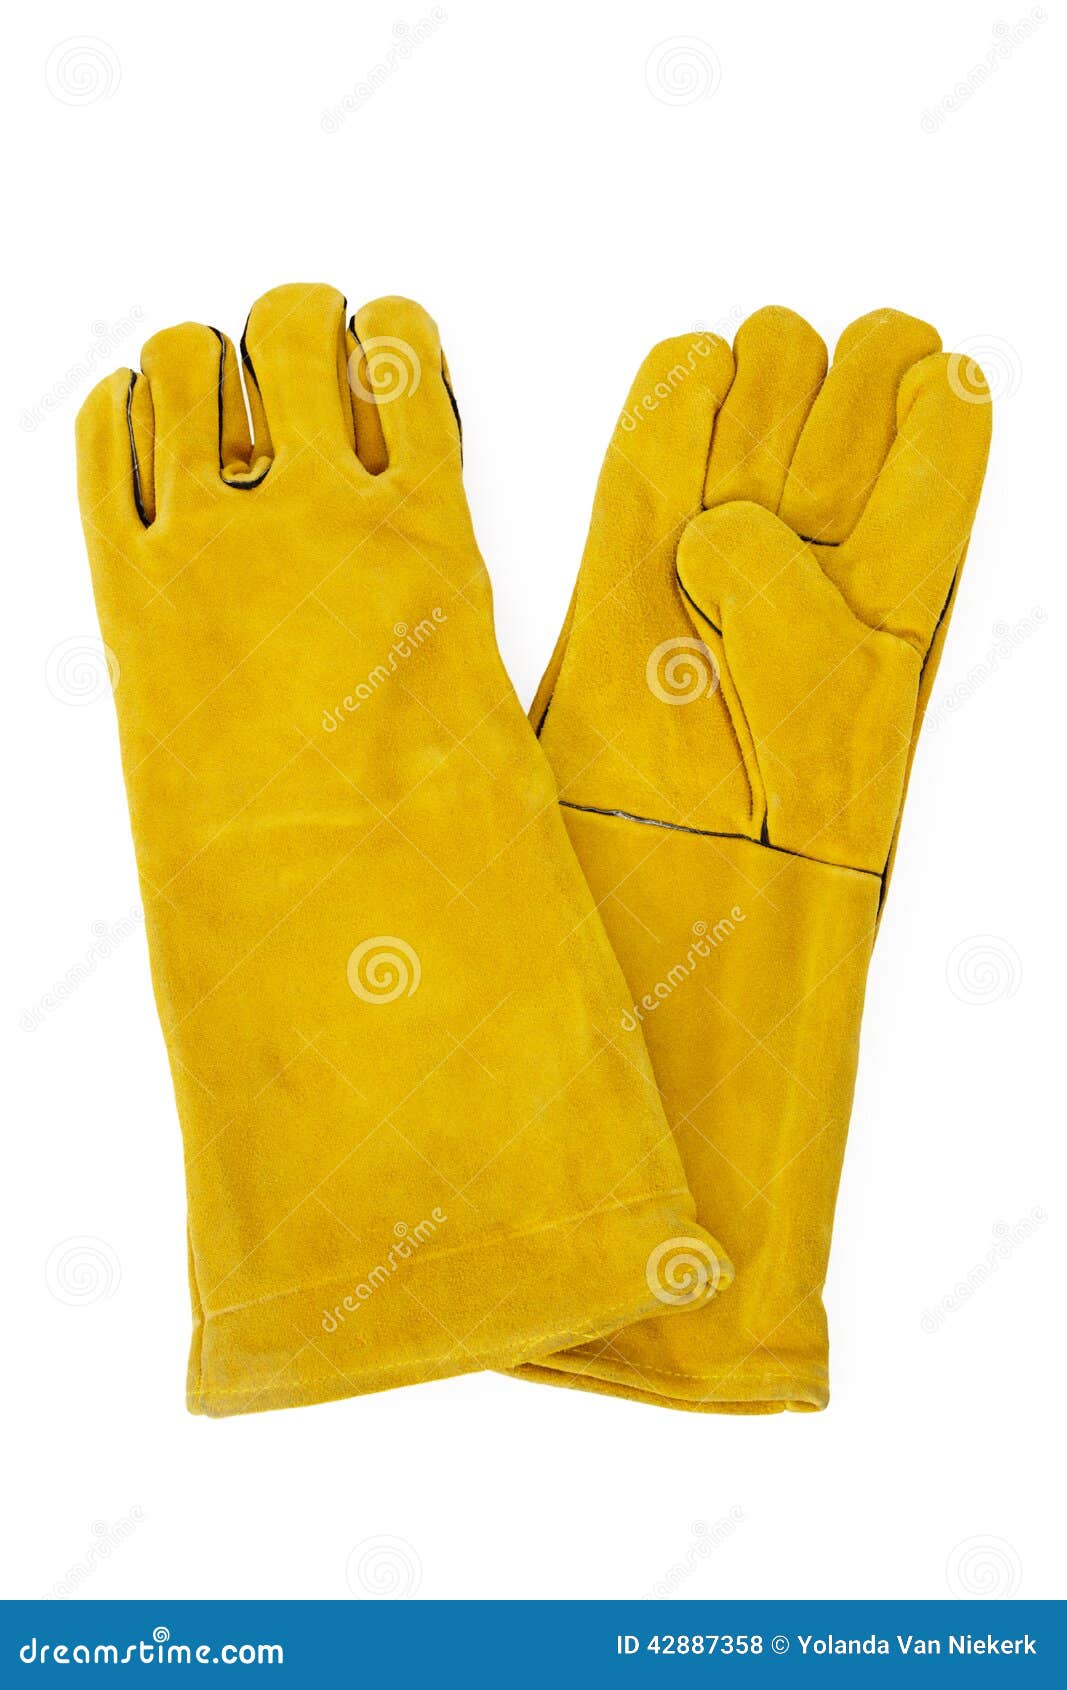 Yellow Safety Gloves stock photo. Image of pair, gloves - 42887358